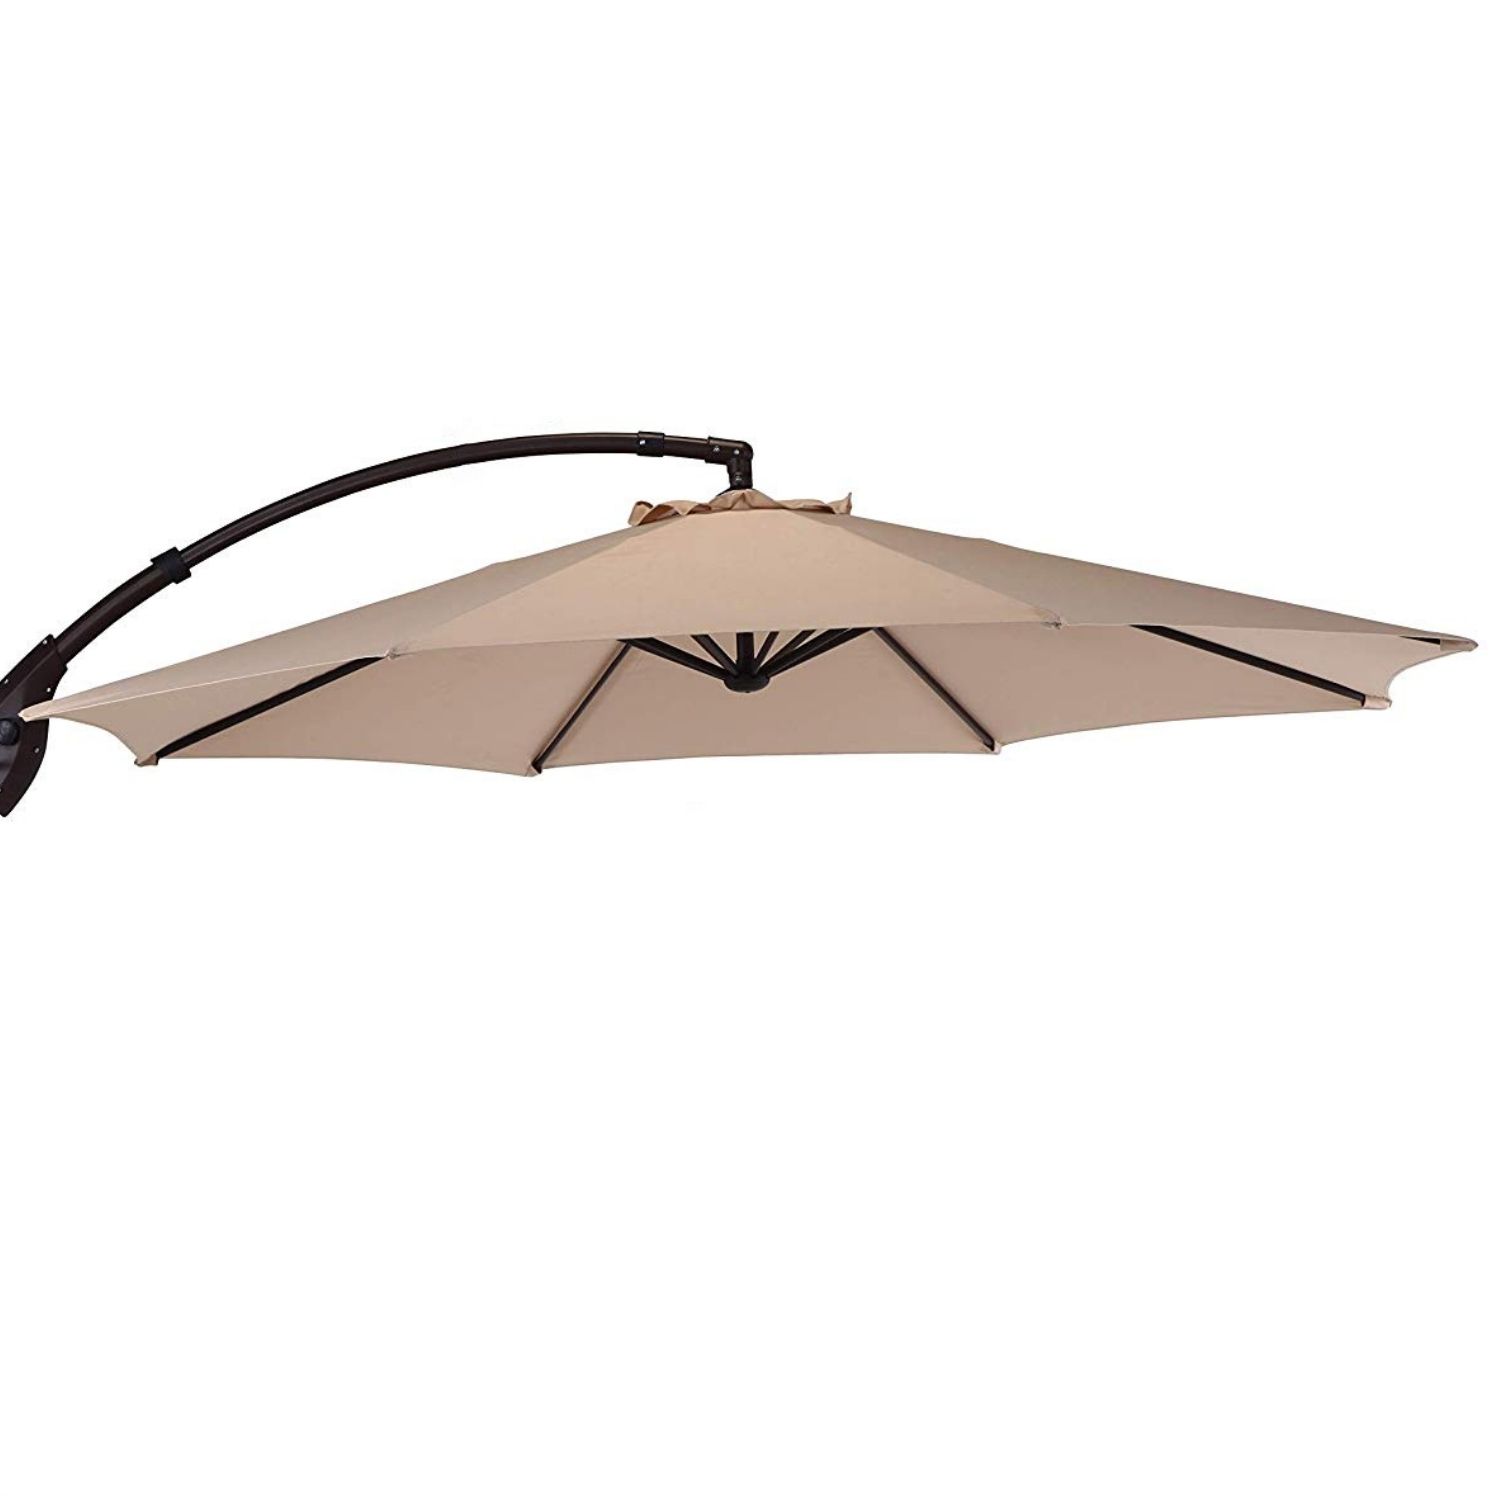 Umbrella Fabric in Beige of 12 ft. Cantilever Patio Umbrella - For After-Sale